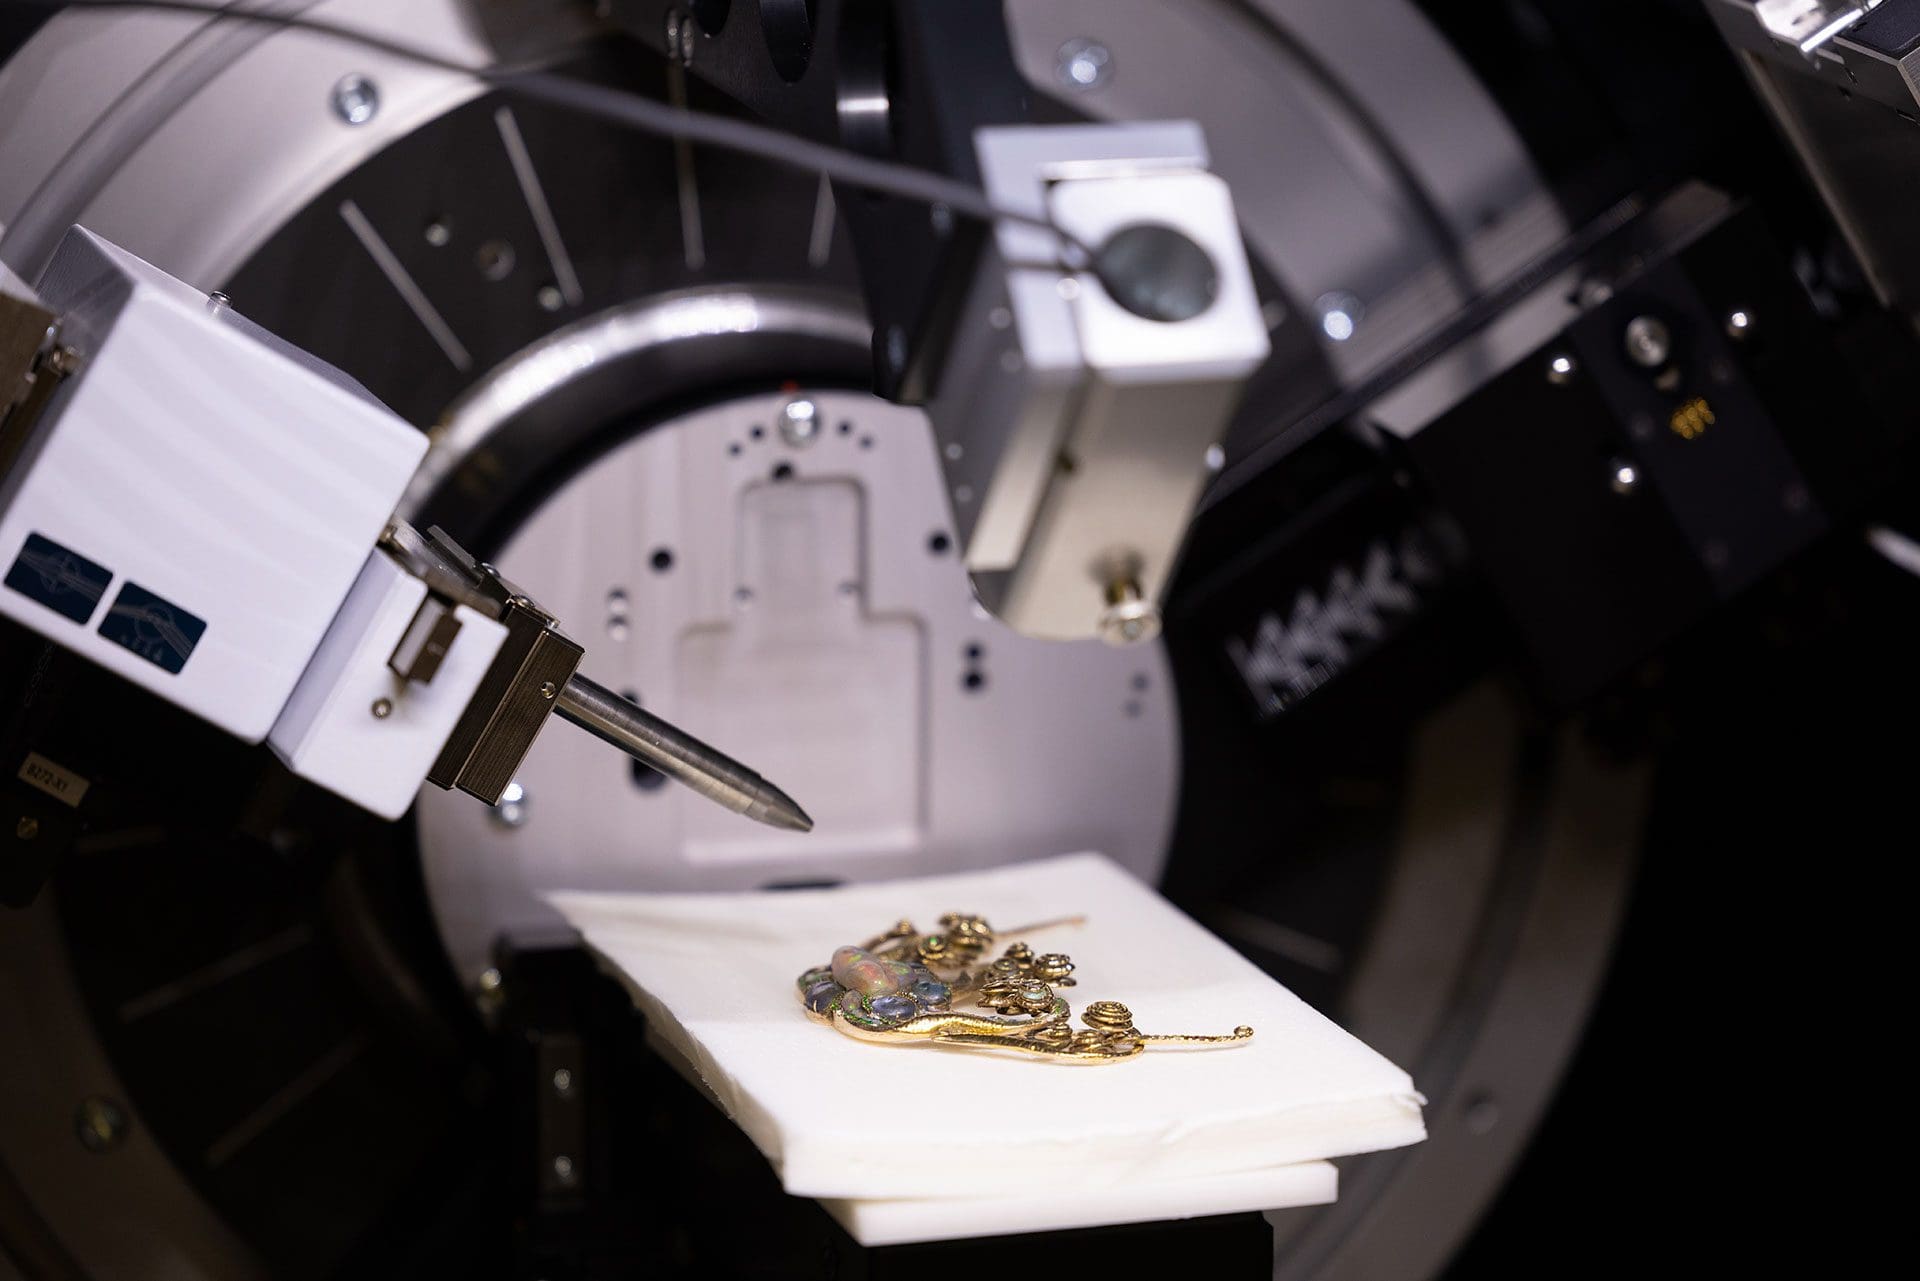 High-precision jewelry crafting equipment with a piece of intricate gold jewelry placed on a white cloth, depicting the modern technology used in fine jewelry making at Tiffany & Co.